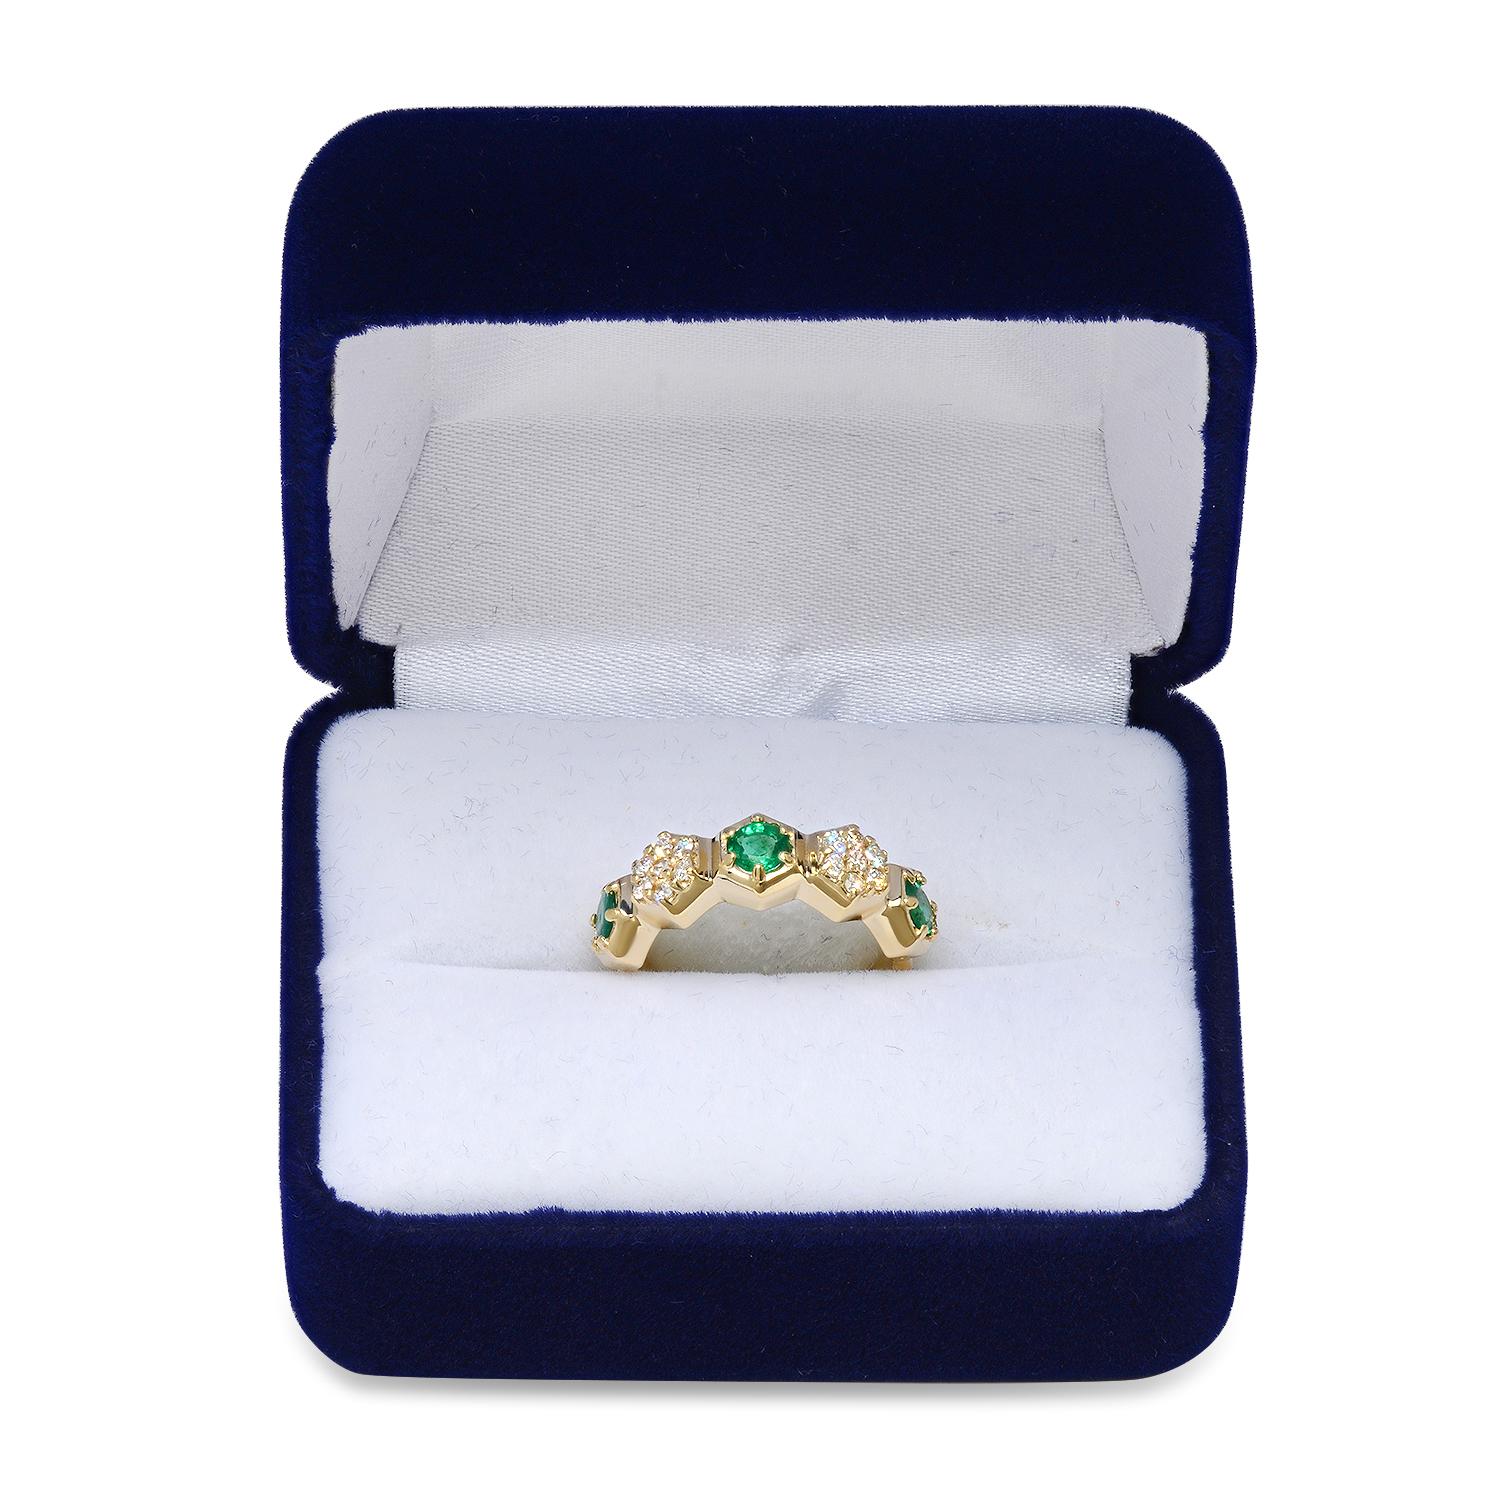 14K Yellow Gold Setting with 1.25ct Emarald and 0.30ct Diamond Ring